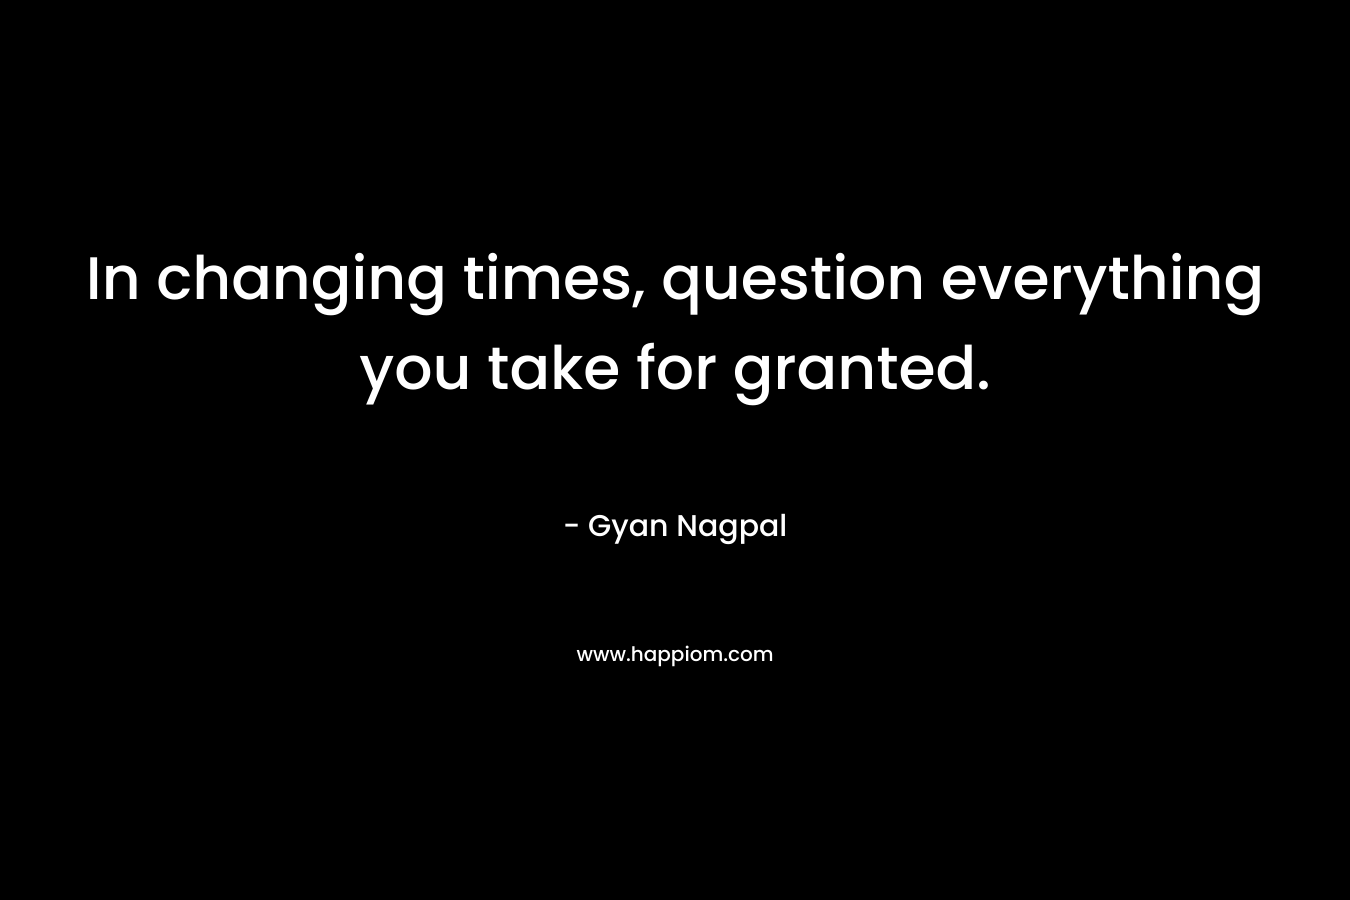 In changing times, question everything you take for granted.